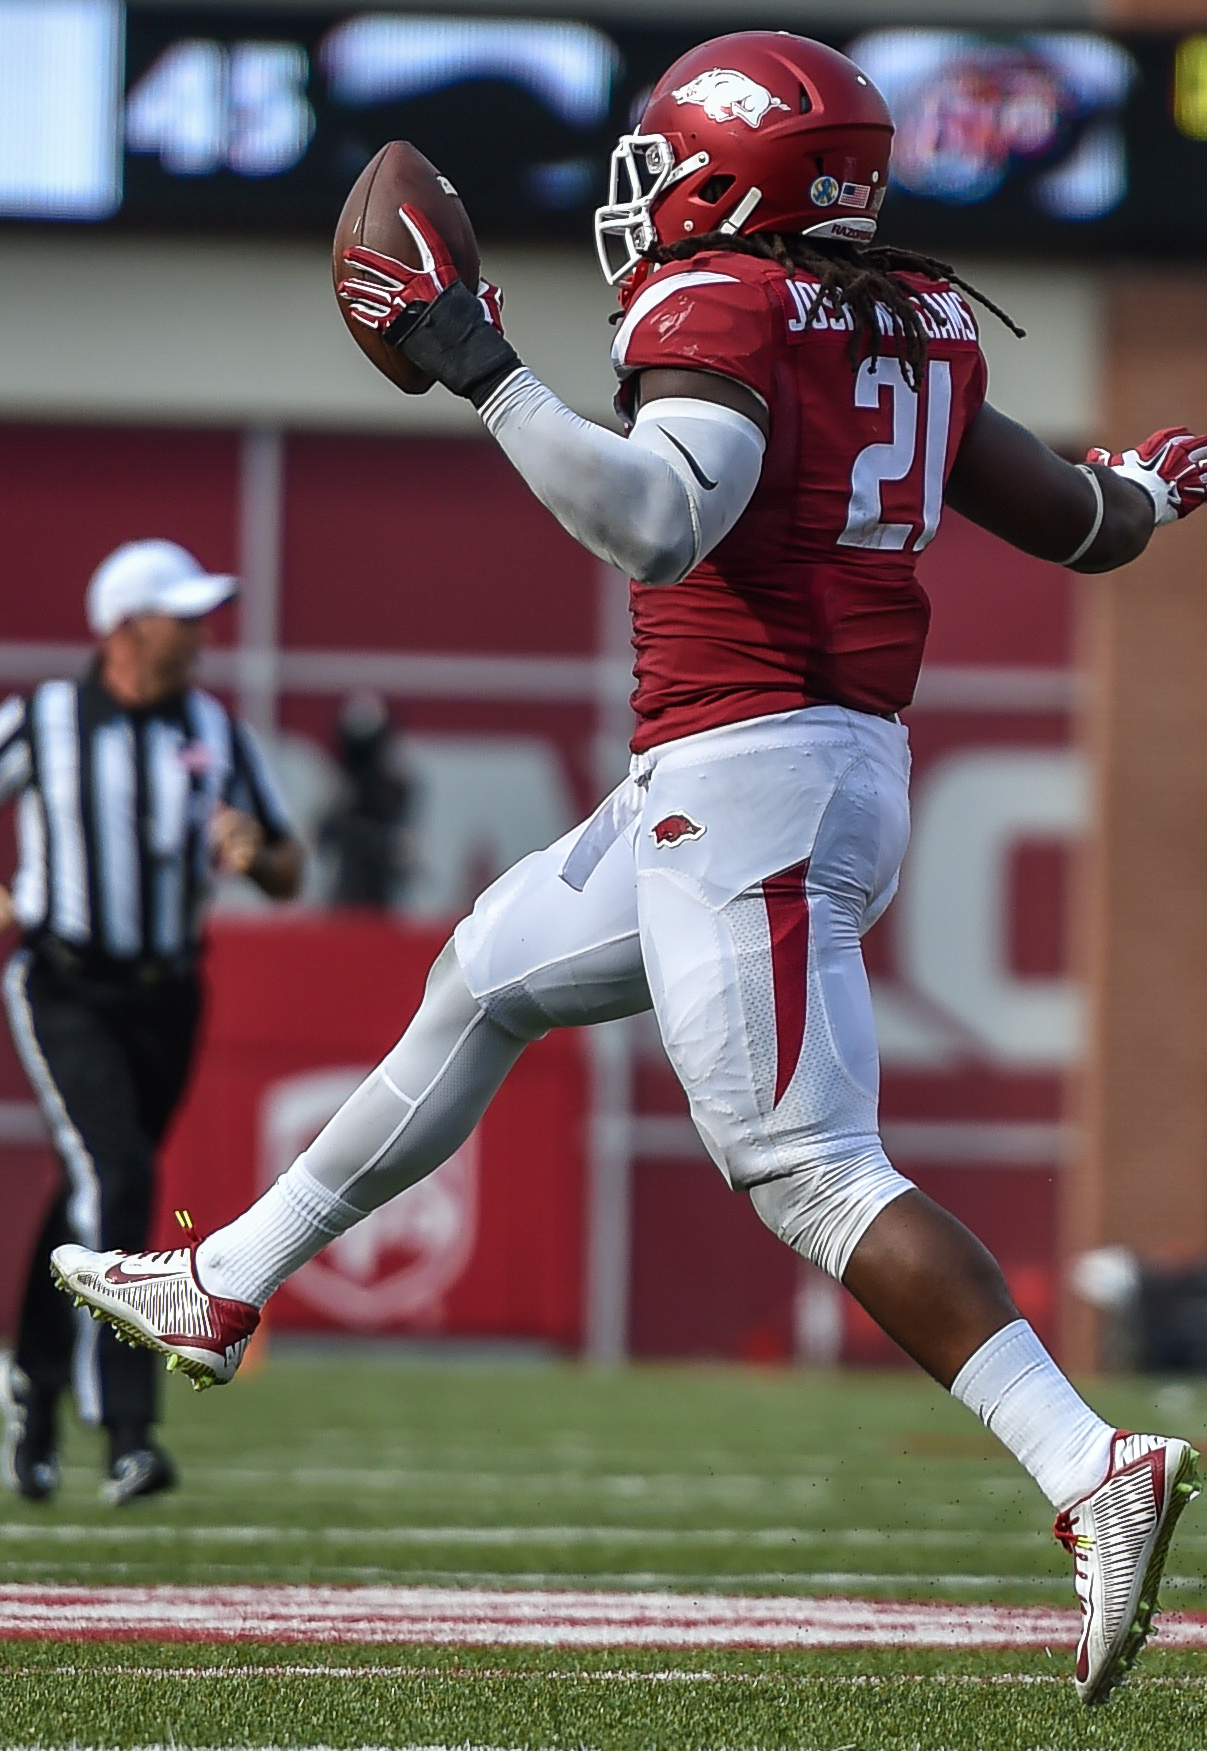 Hogs: LB Josh Williams back from the brink; Beanum out for now